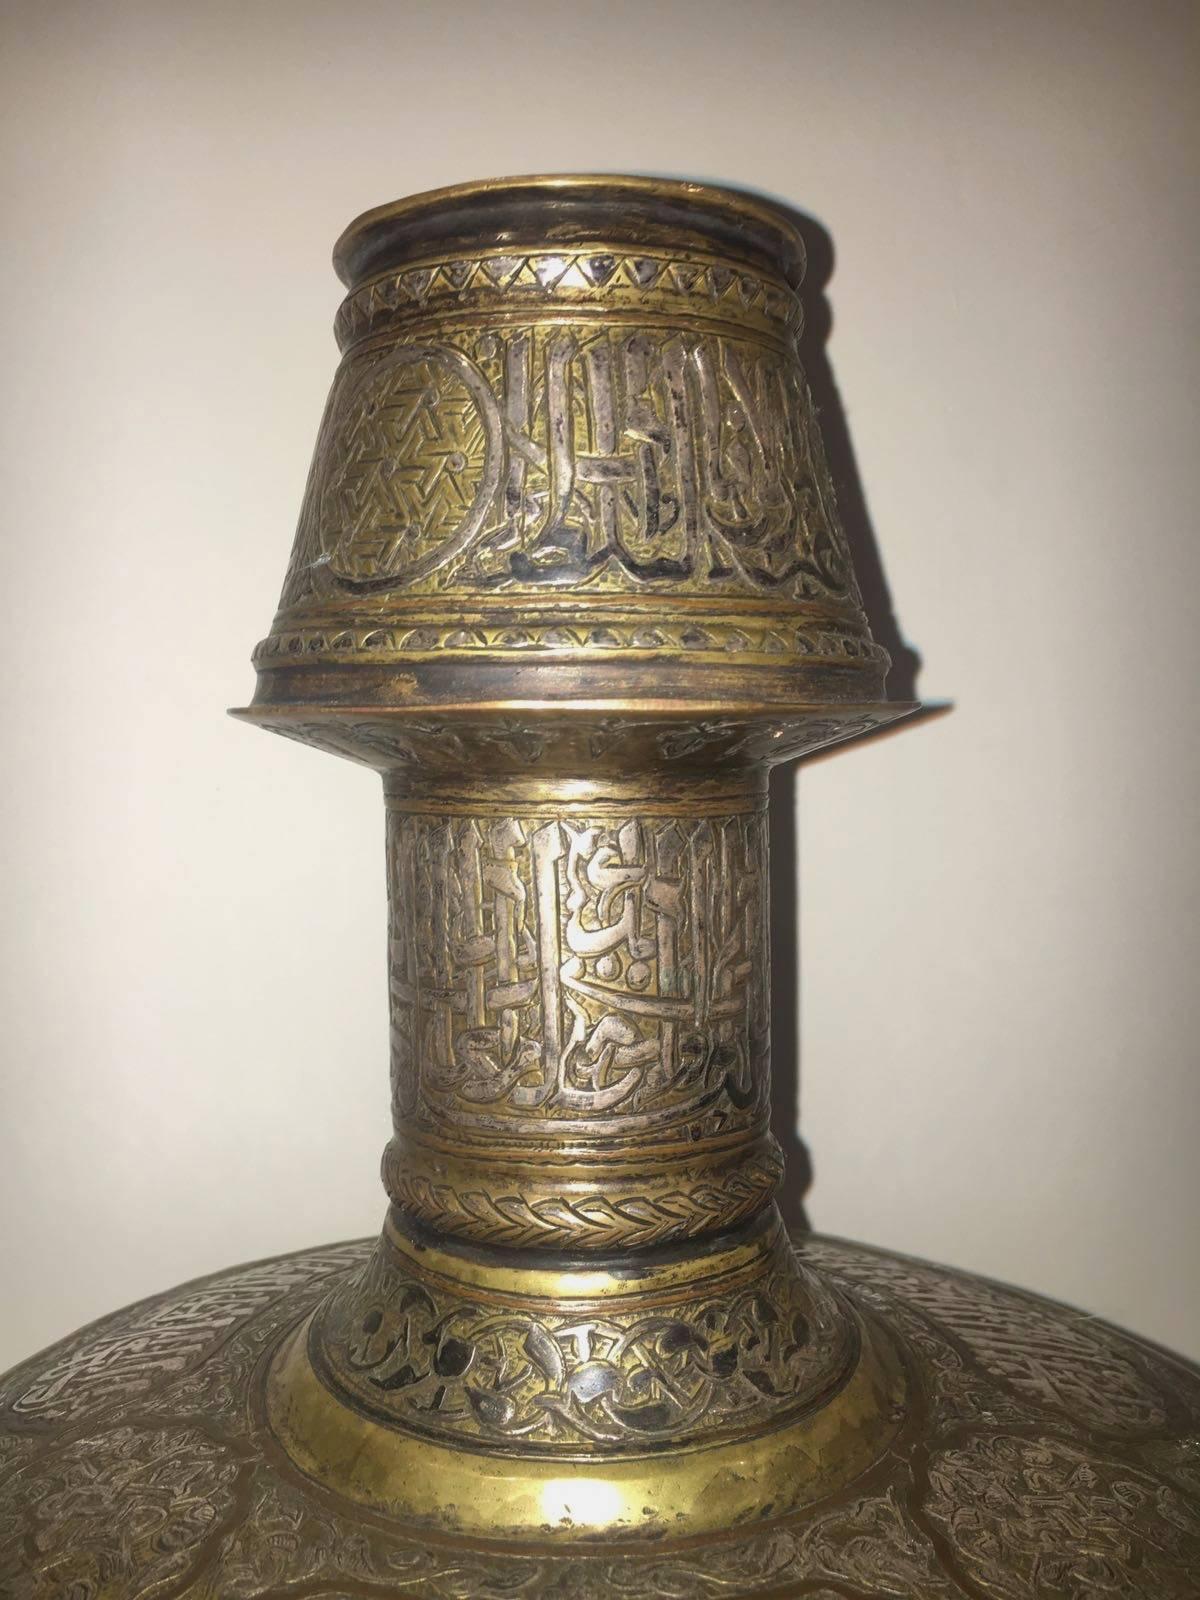 A 20th century Mamluk Revival candlestick made of copper with silver inlay featuring various Arabic inscriptions. In an excellent condition.